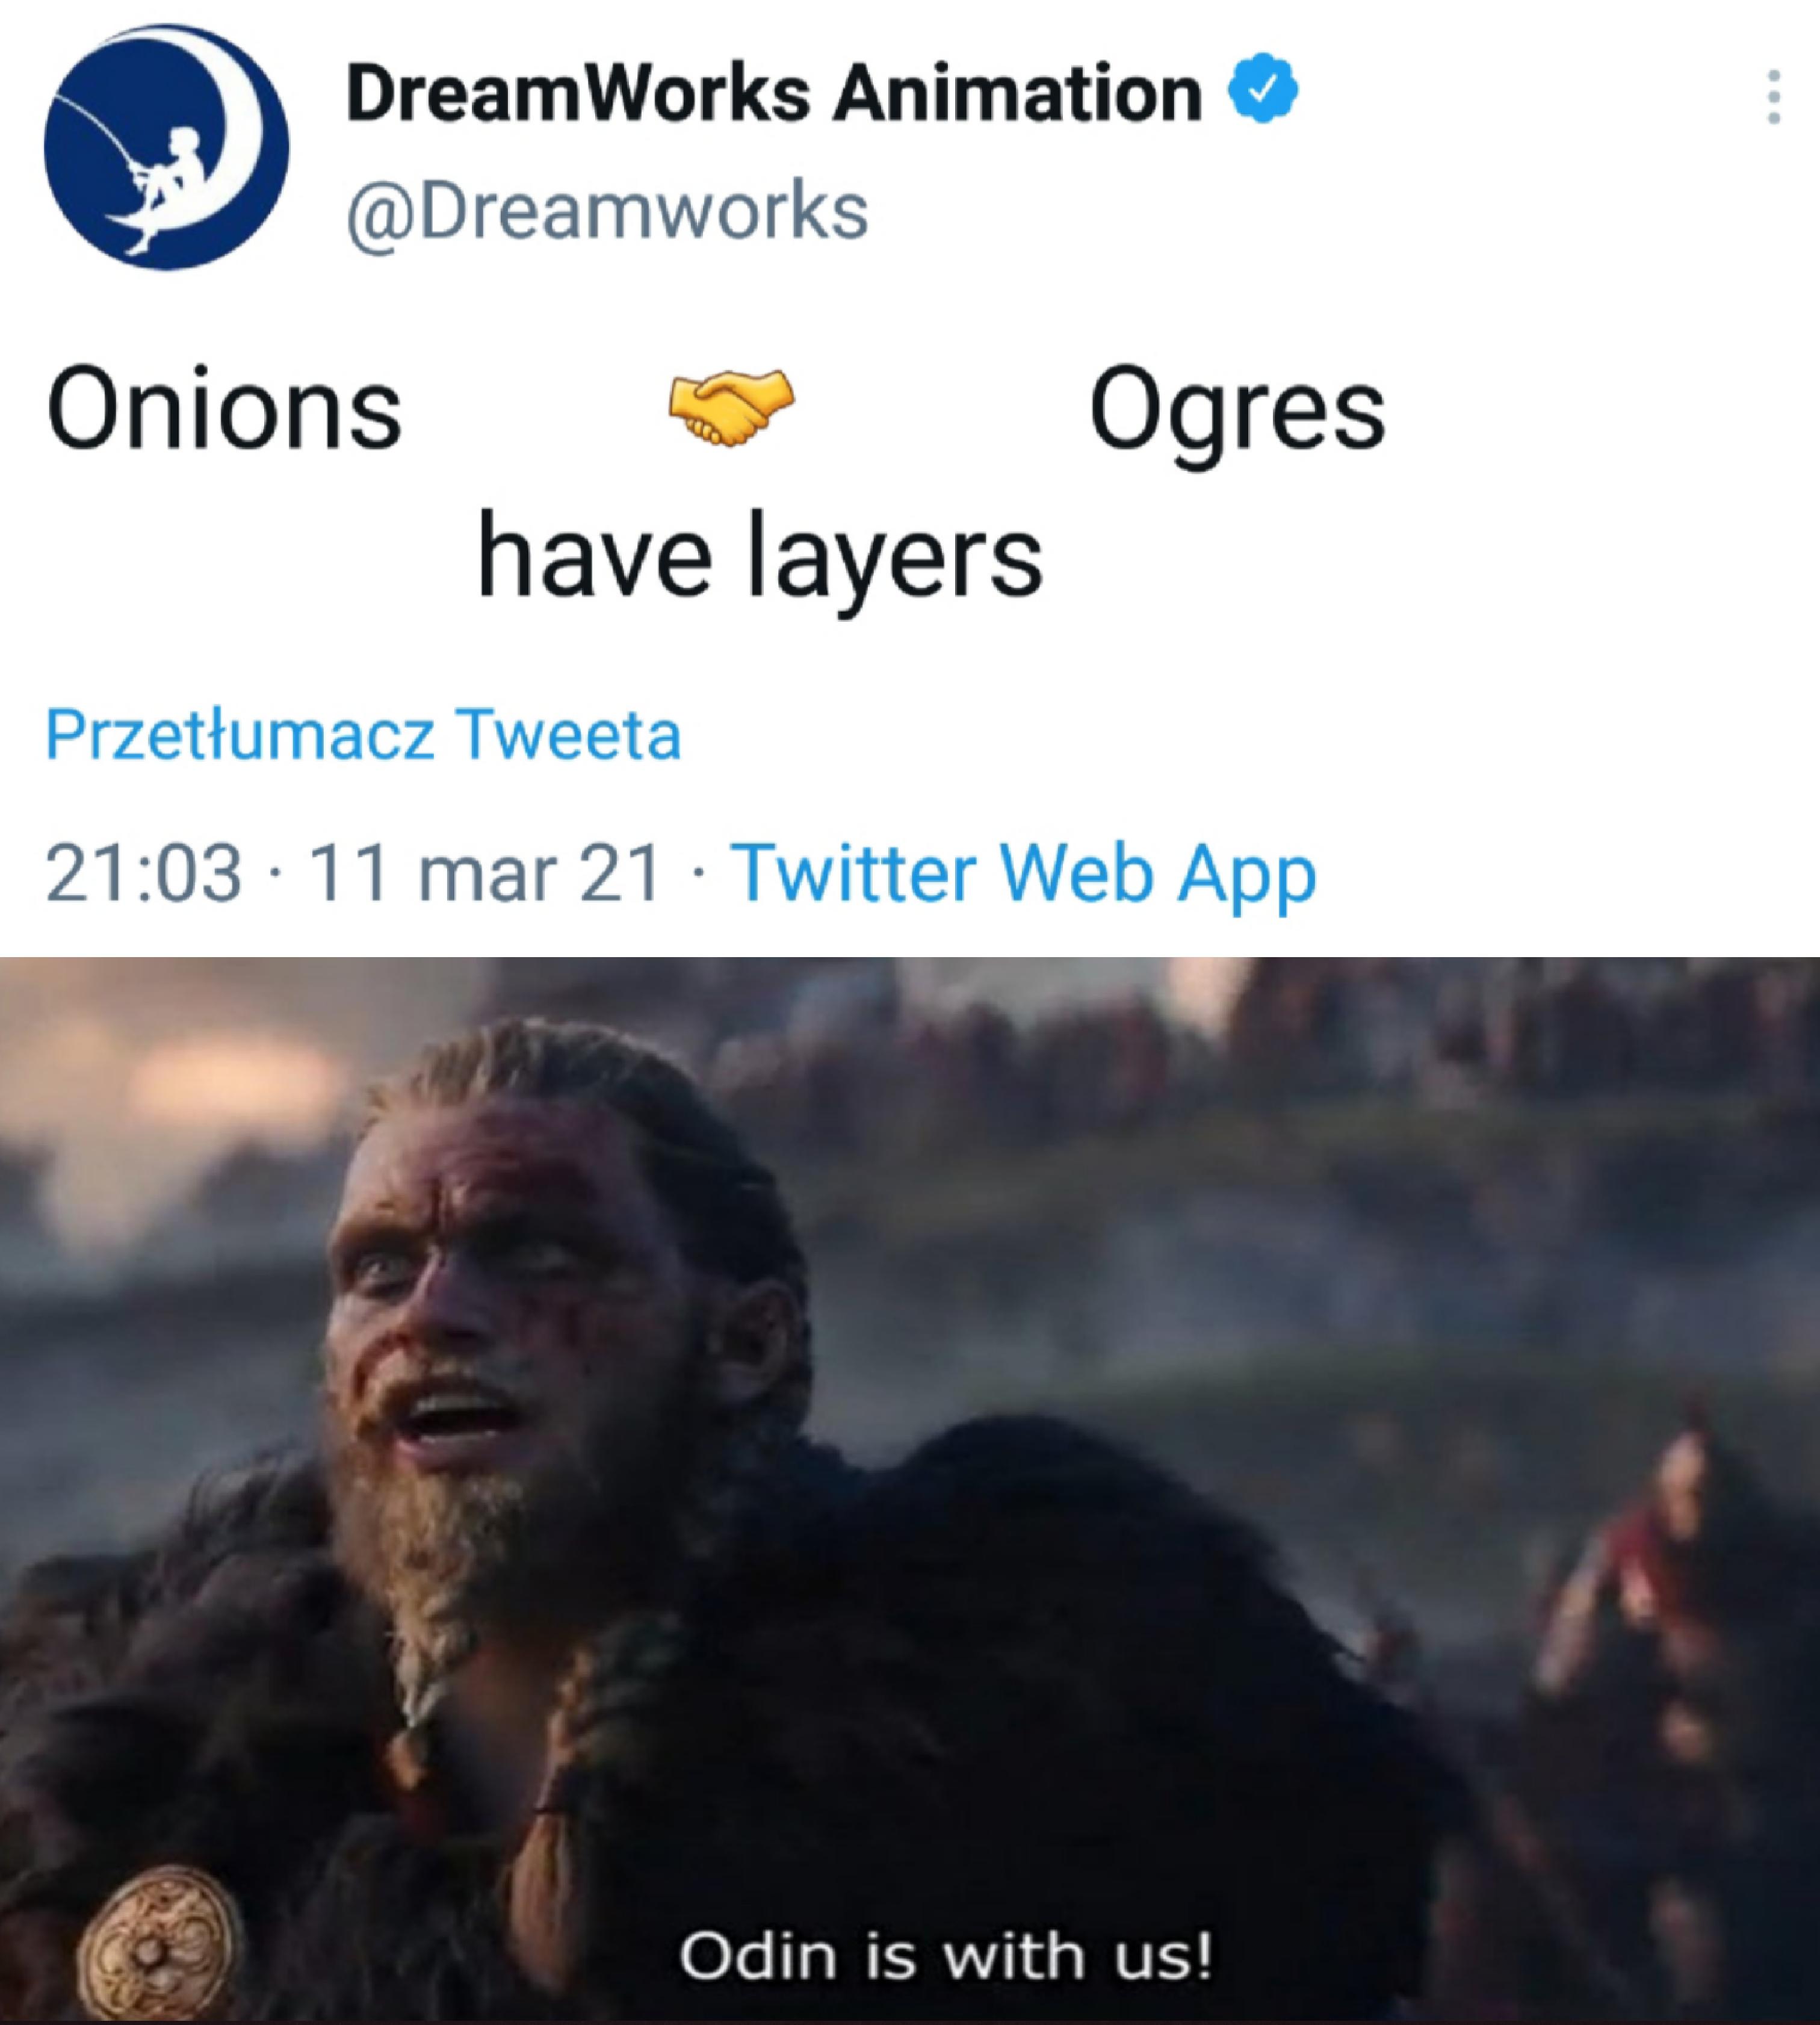 awesome pics and funny memes - mars penis meme - DreamWorks Animation Onions Ogres have layers Przetumacz Tweeta 11 mar 21 Twitter Web App Odin is with us!